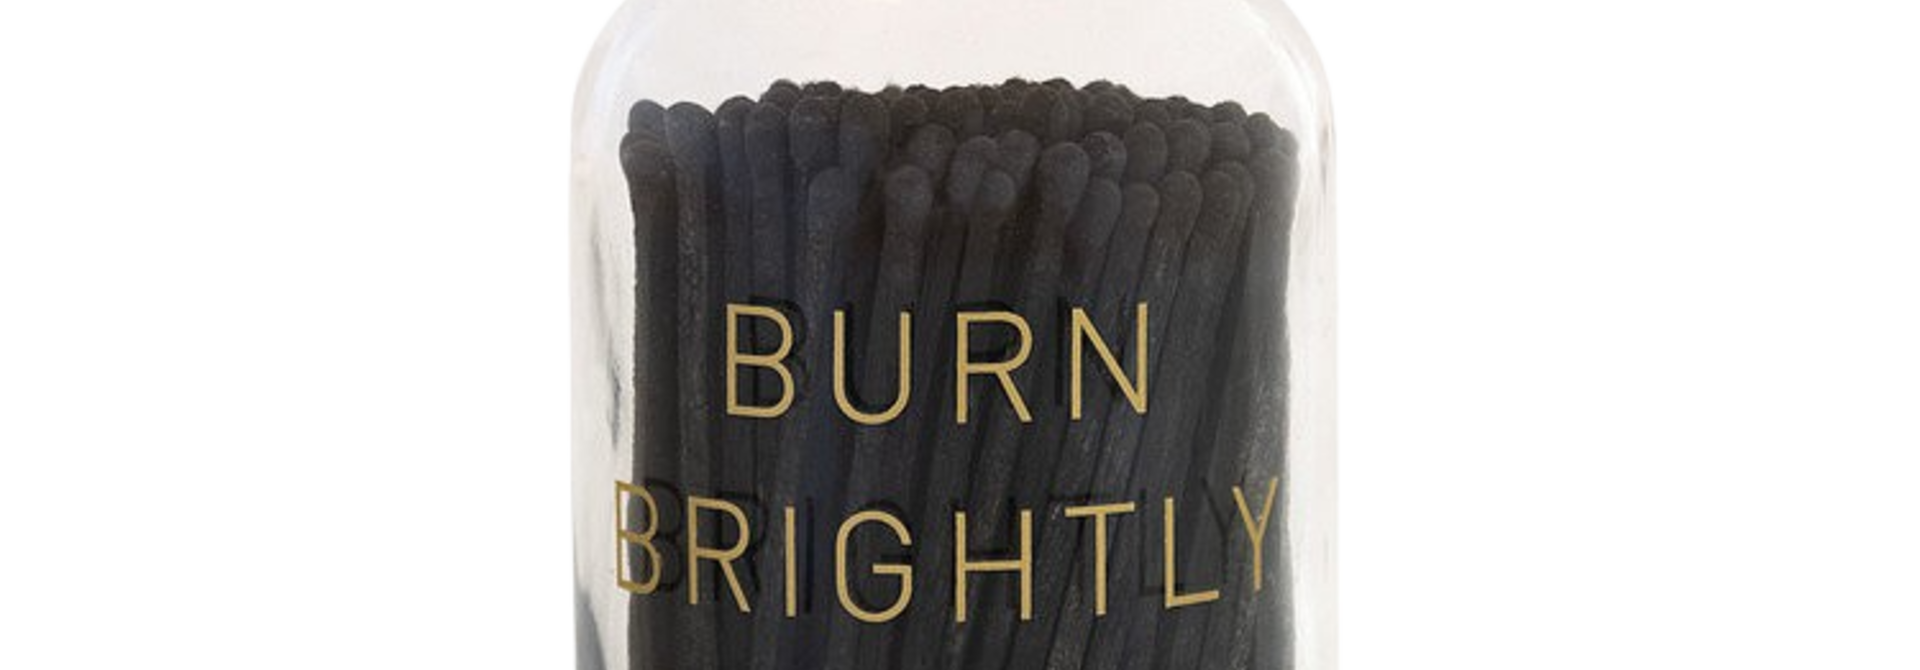 Burn Brightly | The Match Collection